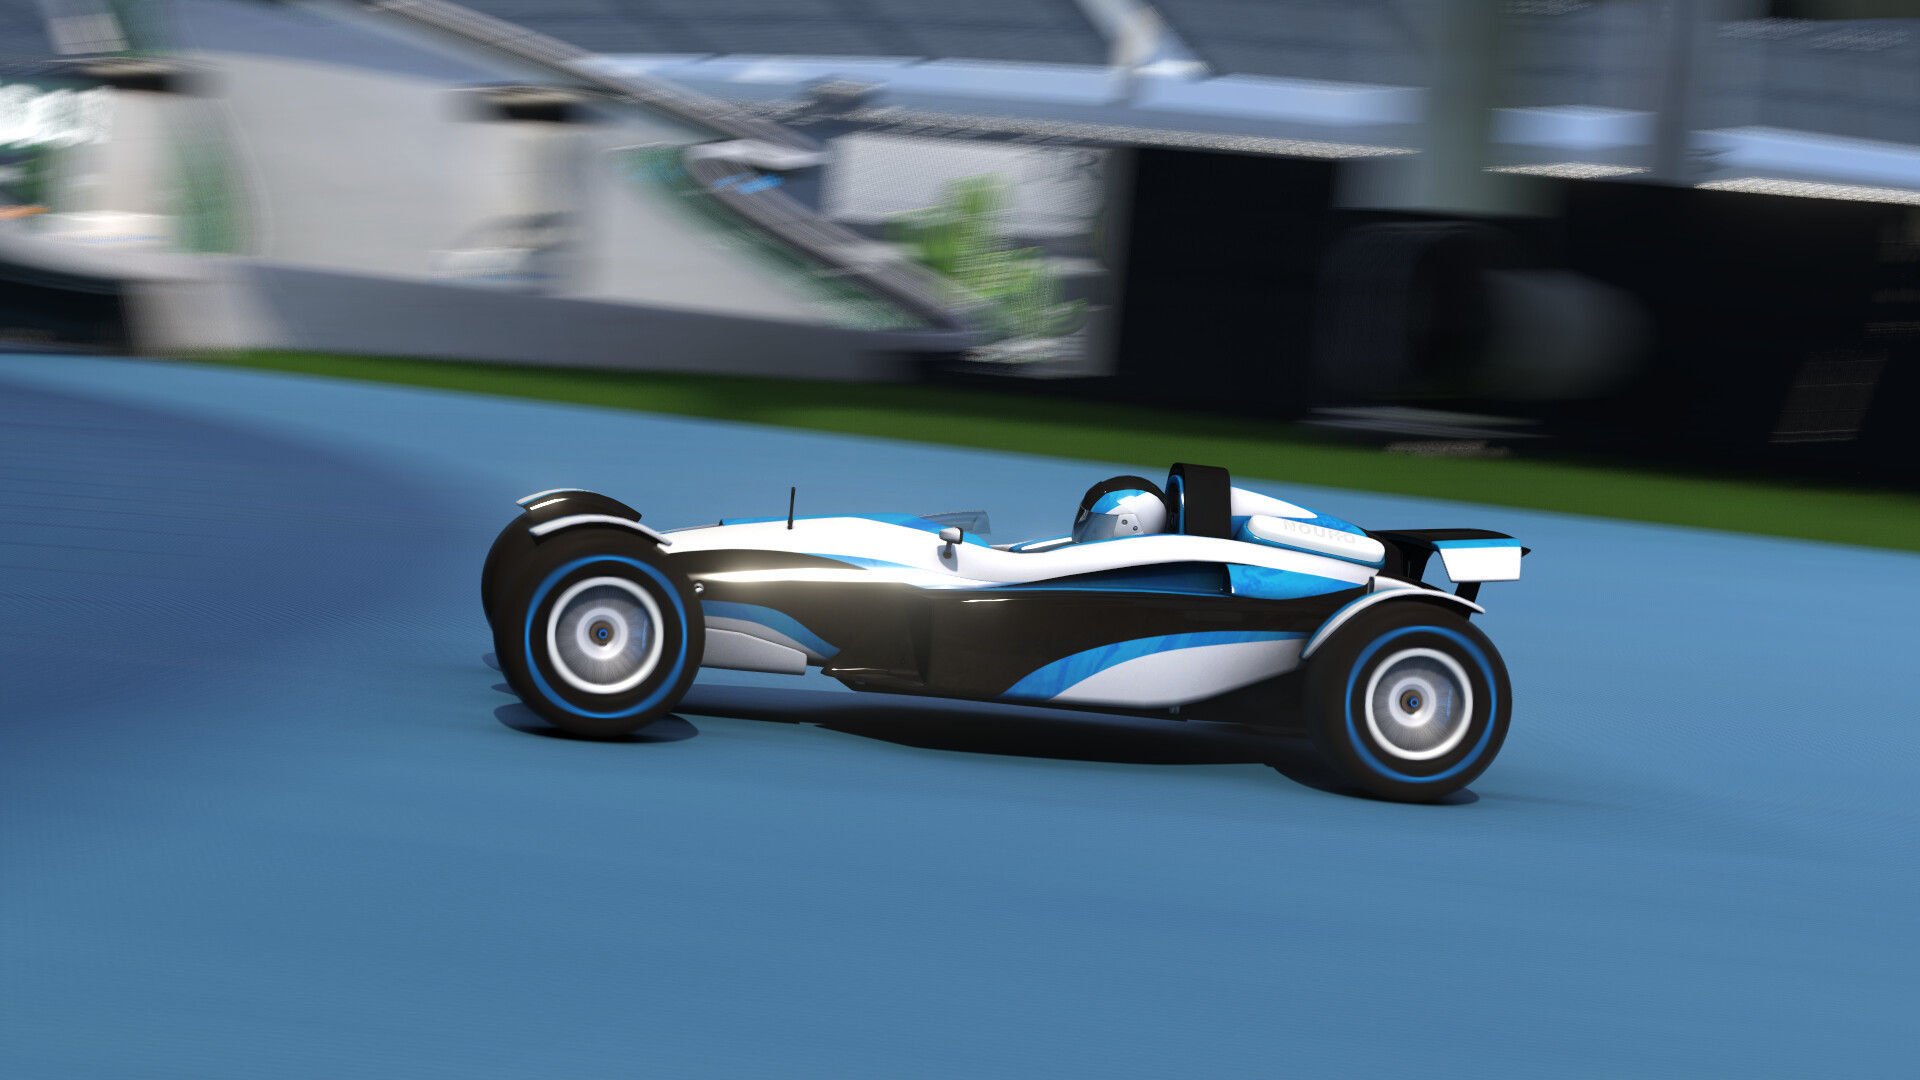 trackmania 2 stadium cant open models